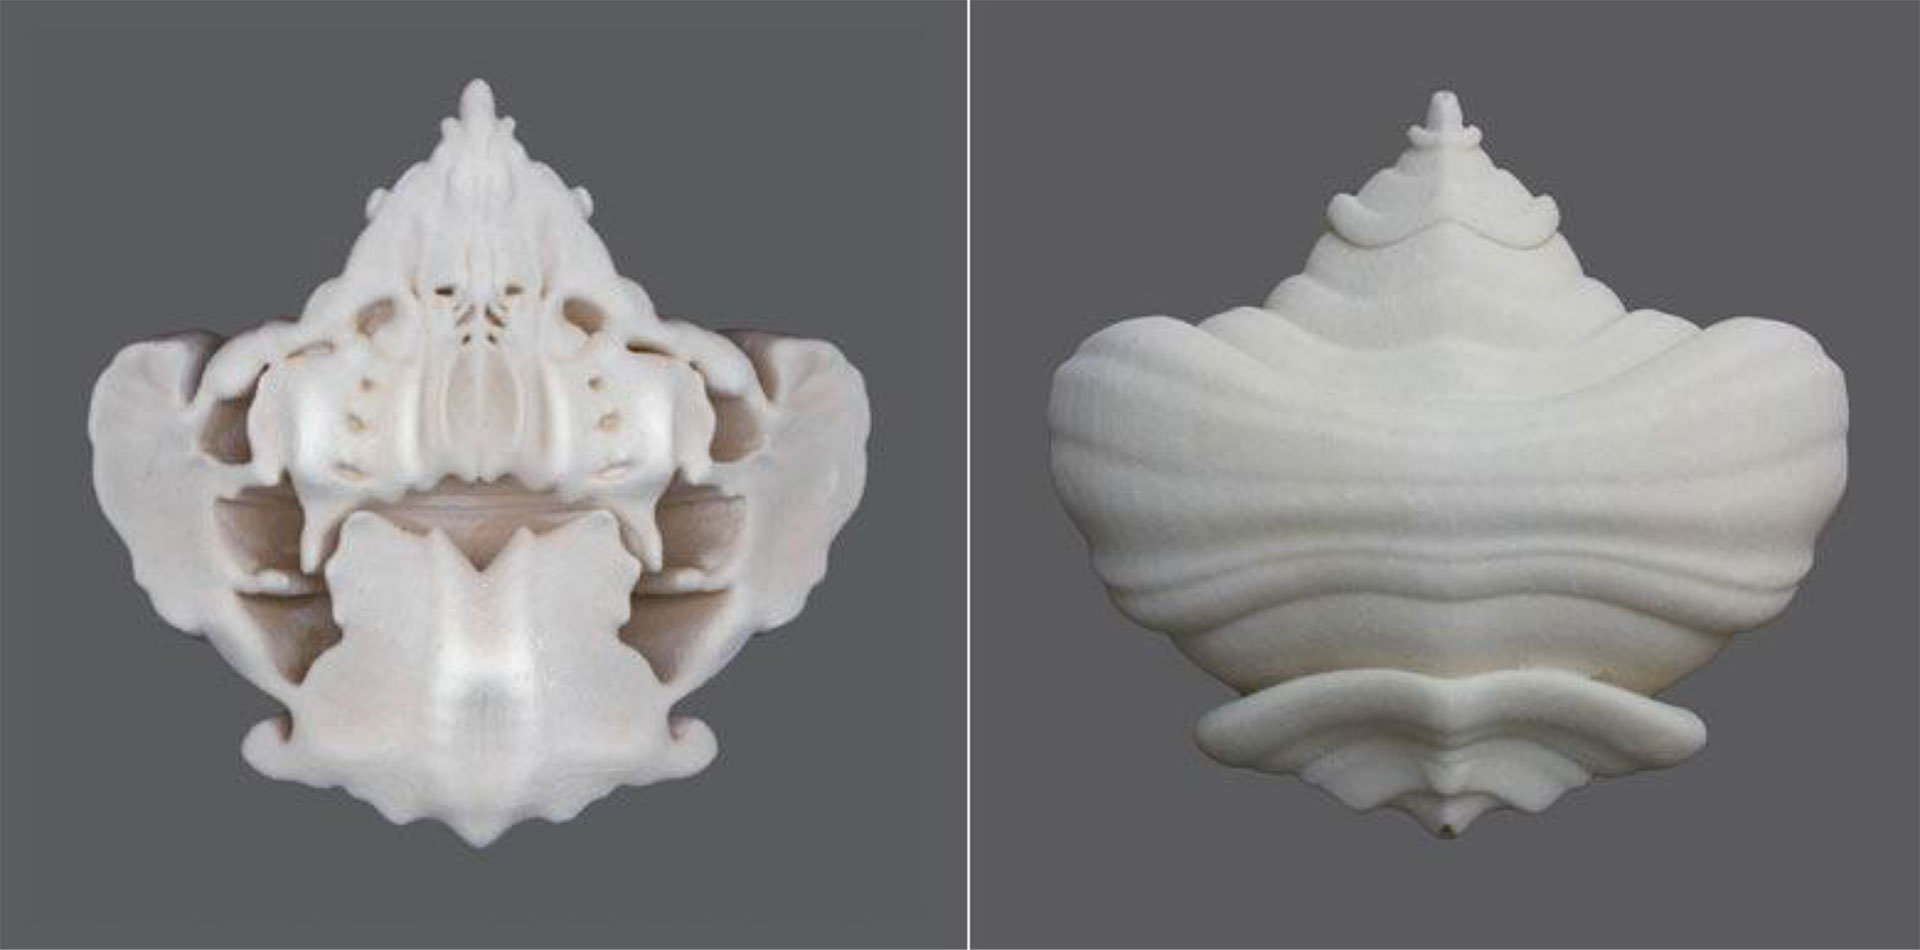 Suzanne Anker, Rorschach series (Crab), 2004-05. Rapid Prototype Sculpture. Plaster and resin, Edition of 3. 11” x 10” x 3”. $3,000. Also available in 4.5” x 5” x 1”. Plaster and resin; ivory white or painted black, Edition of 6. $500.